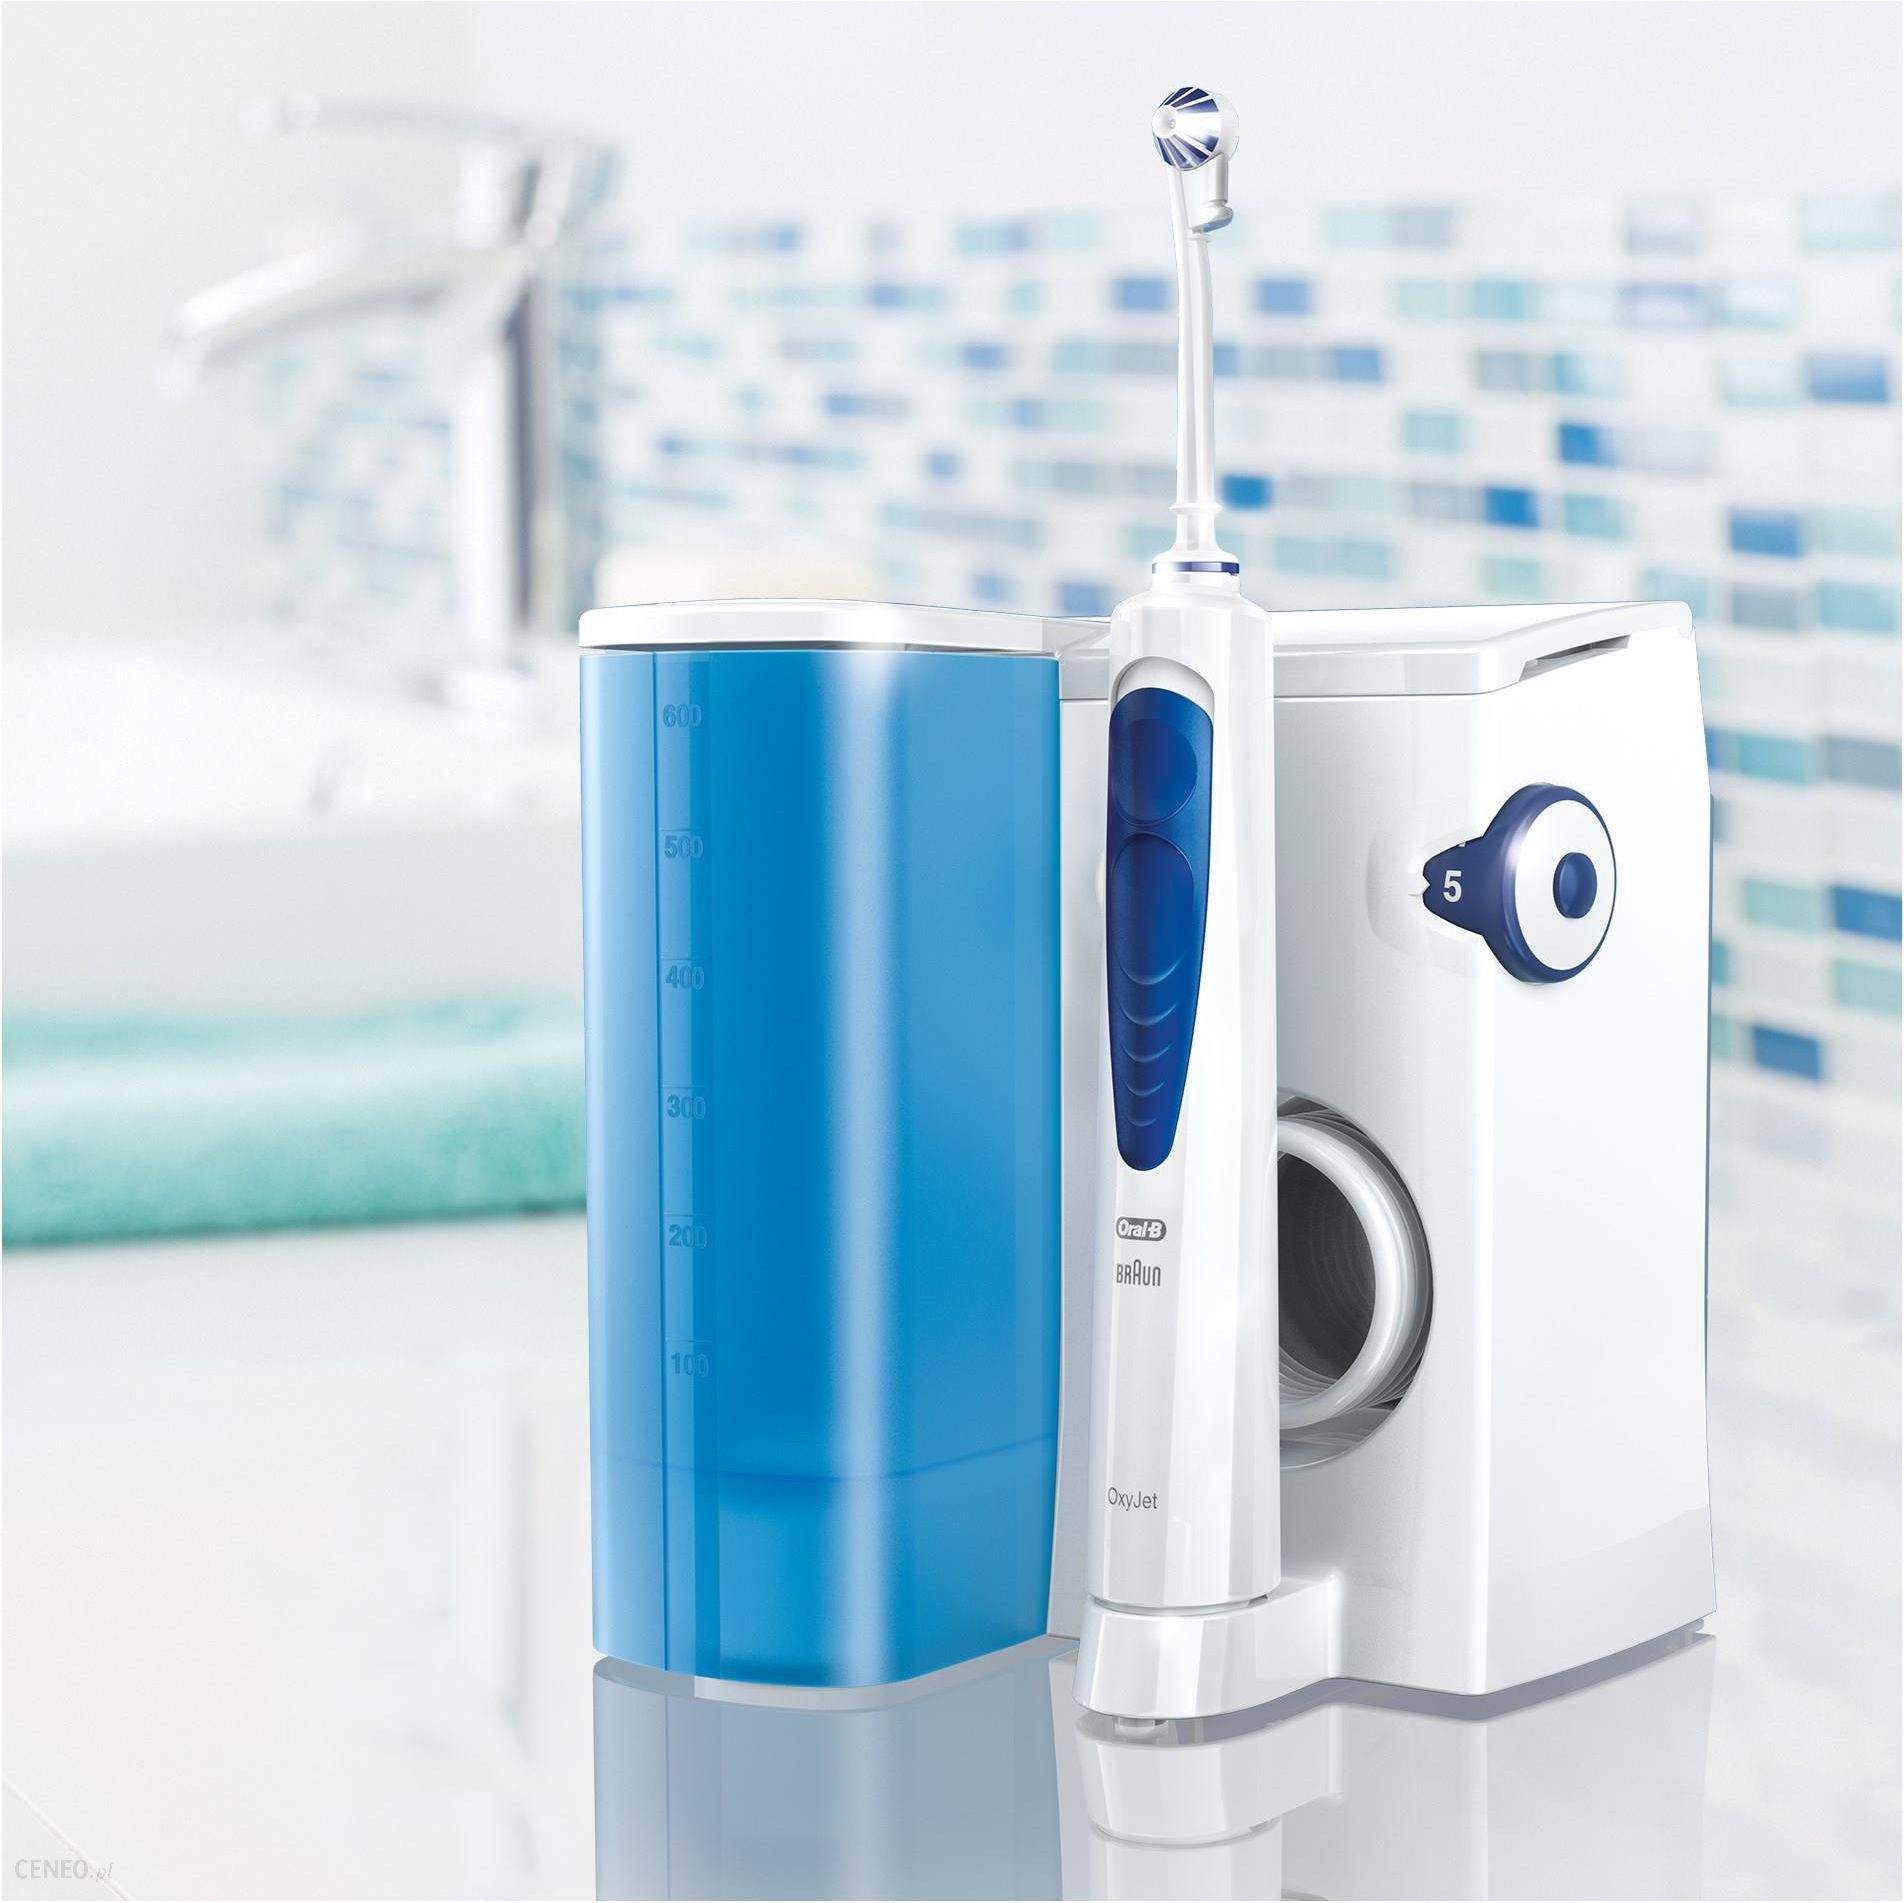 Oral-B Professional Care Oxy Jet